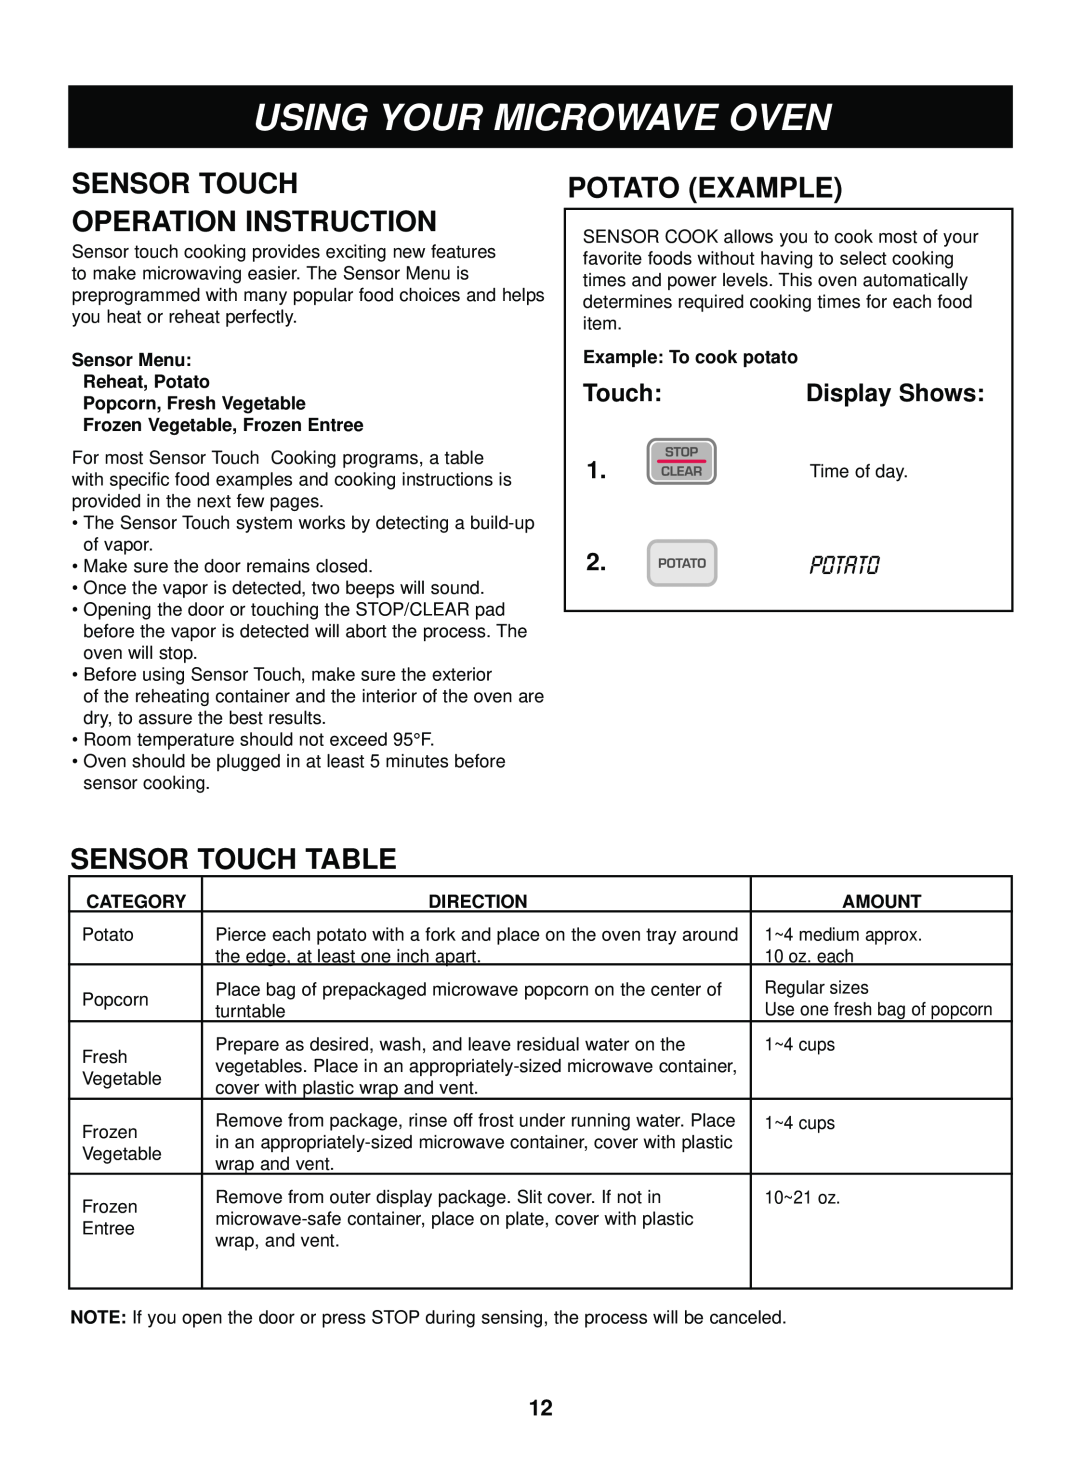 LG Electronics LCRM1240SW manual Operation Instruction, Potato Example, Sensor Touch Table, Display Shows 